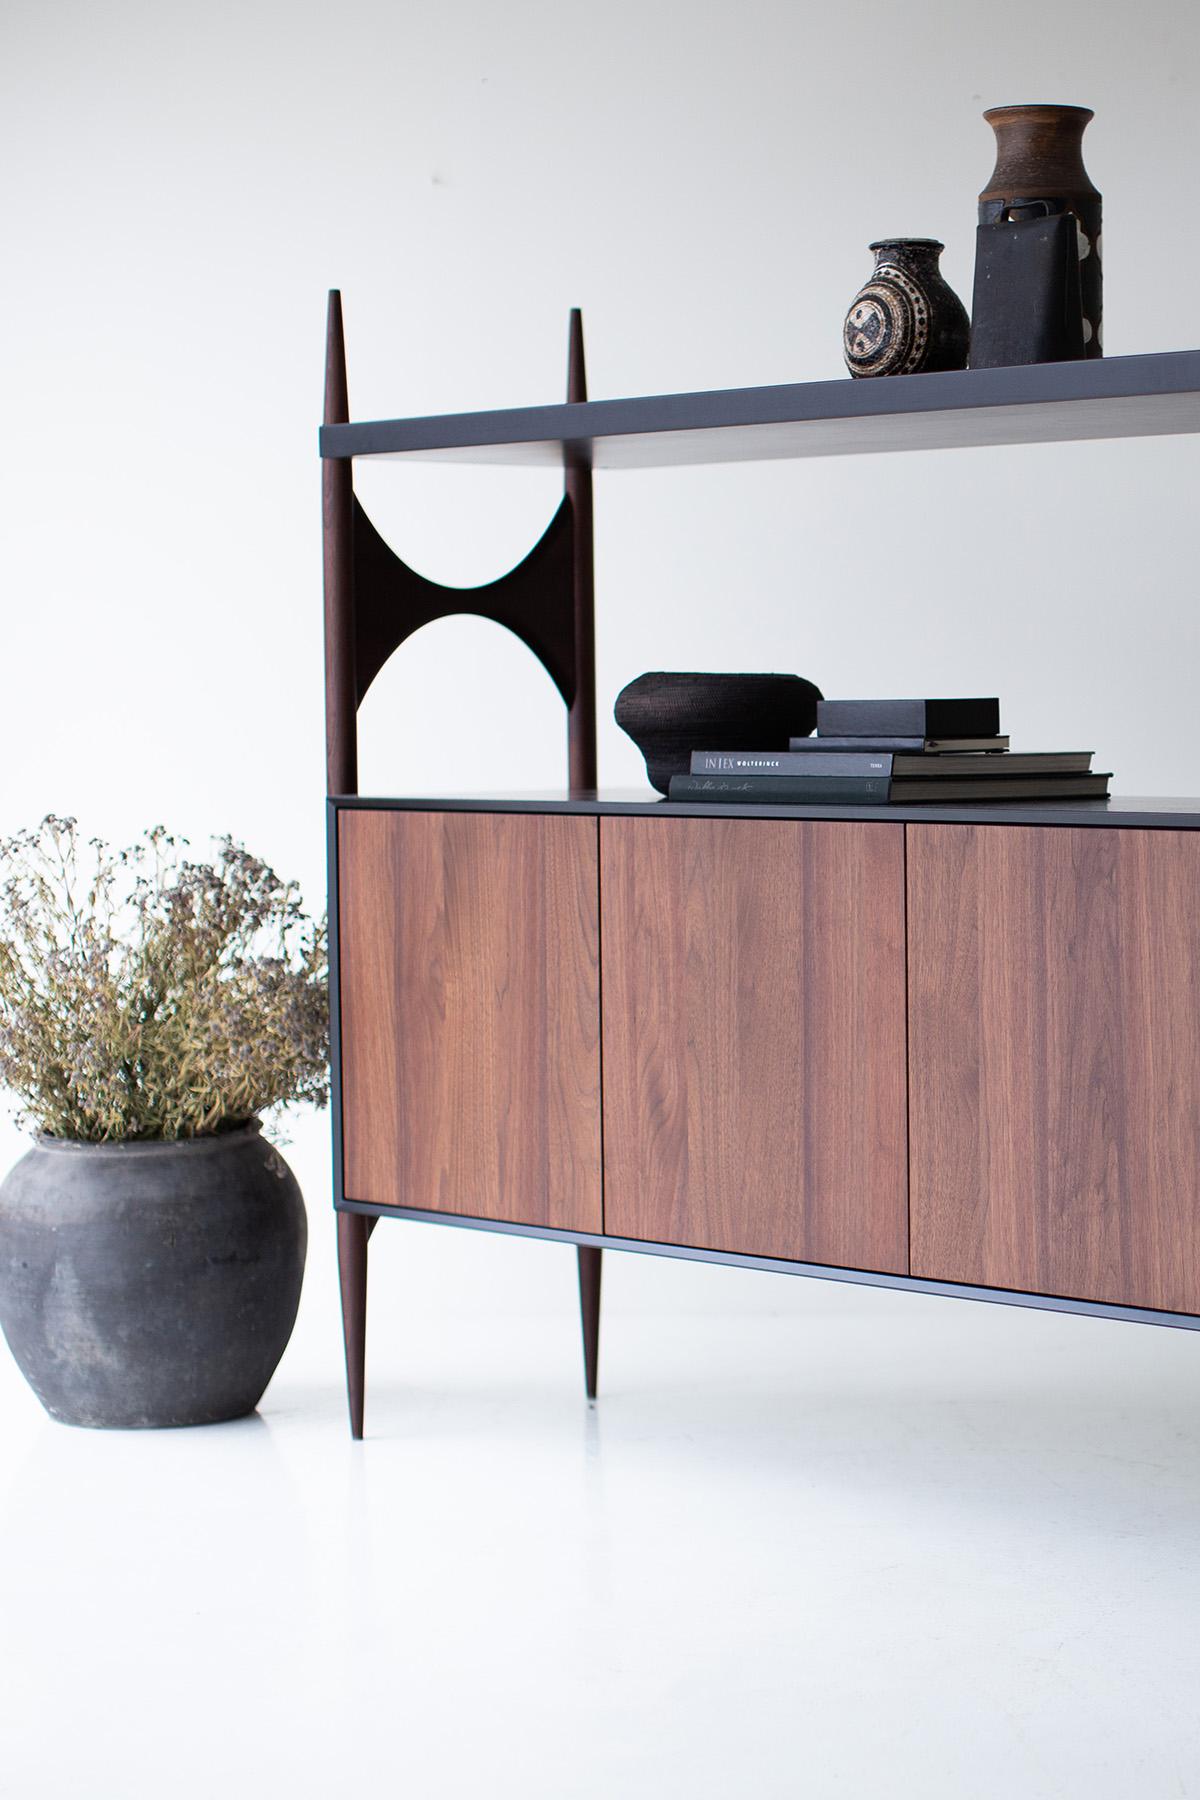 Cambre Credenza, modern Walnut Credenza, black, 2 drawers, for Craft Associates

This modern teak credenza from the Cambre Collection for Craft Associates Furniture is expertly crafted. The legs and door fronts are constructed by artisans from